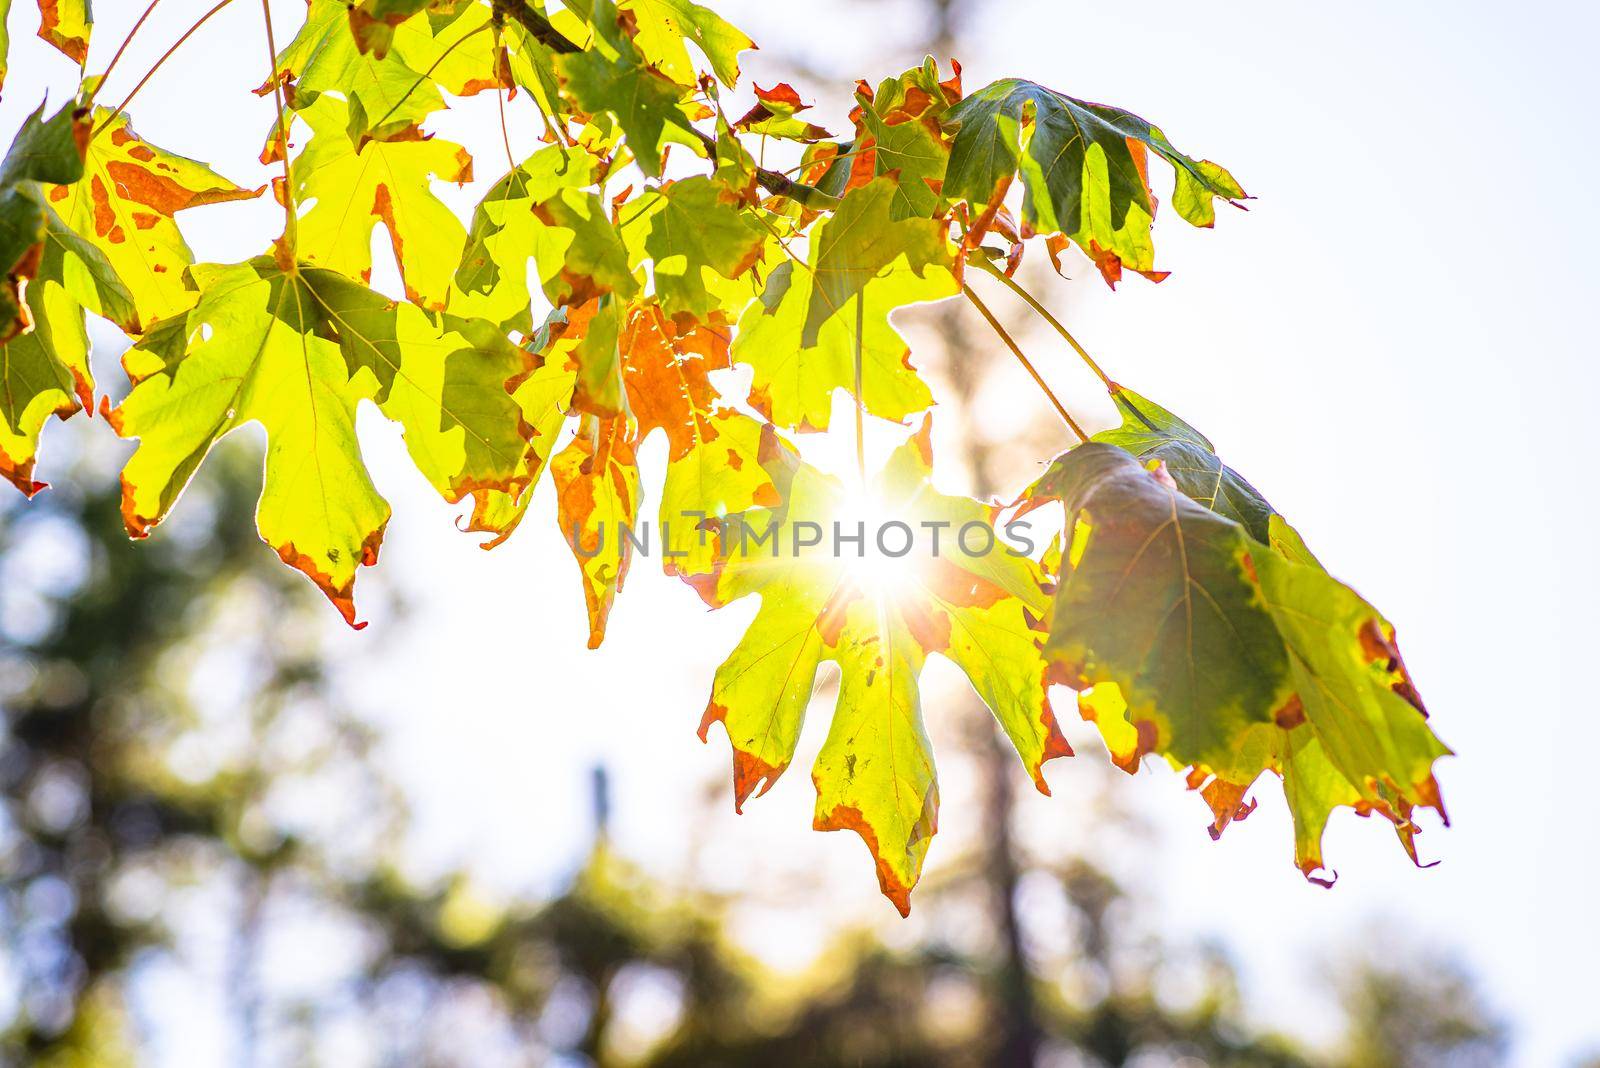 Yellowing and withering leaves on a maple tree, fall season concept.